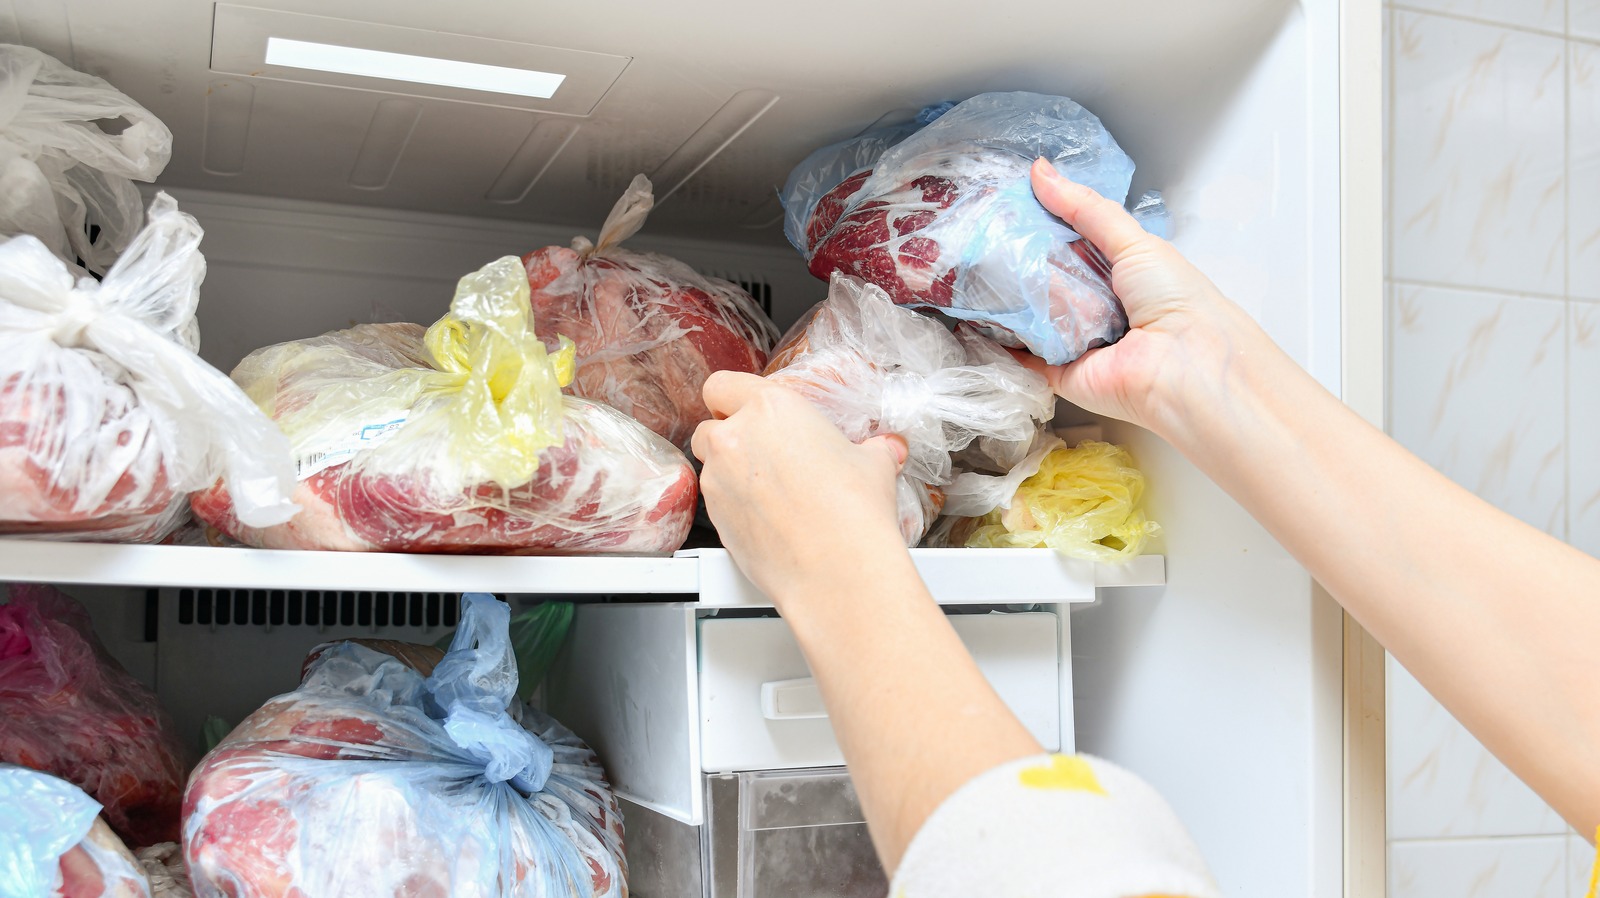 https://www.mashed.com/img/gallery/11-foods-you-should-always-have-in-your-freezer/l-intro-1676665293.jpg